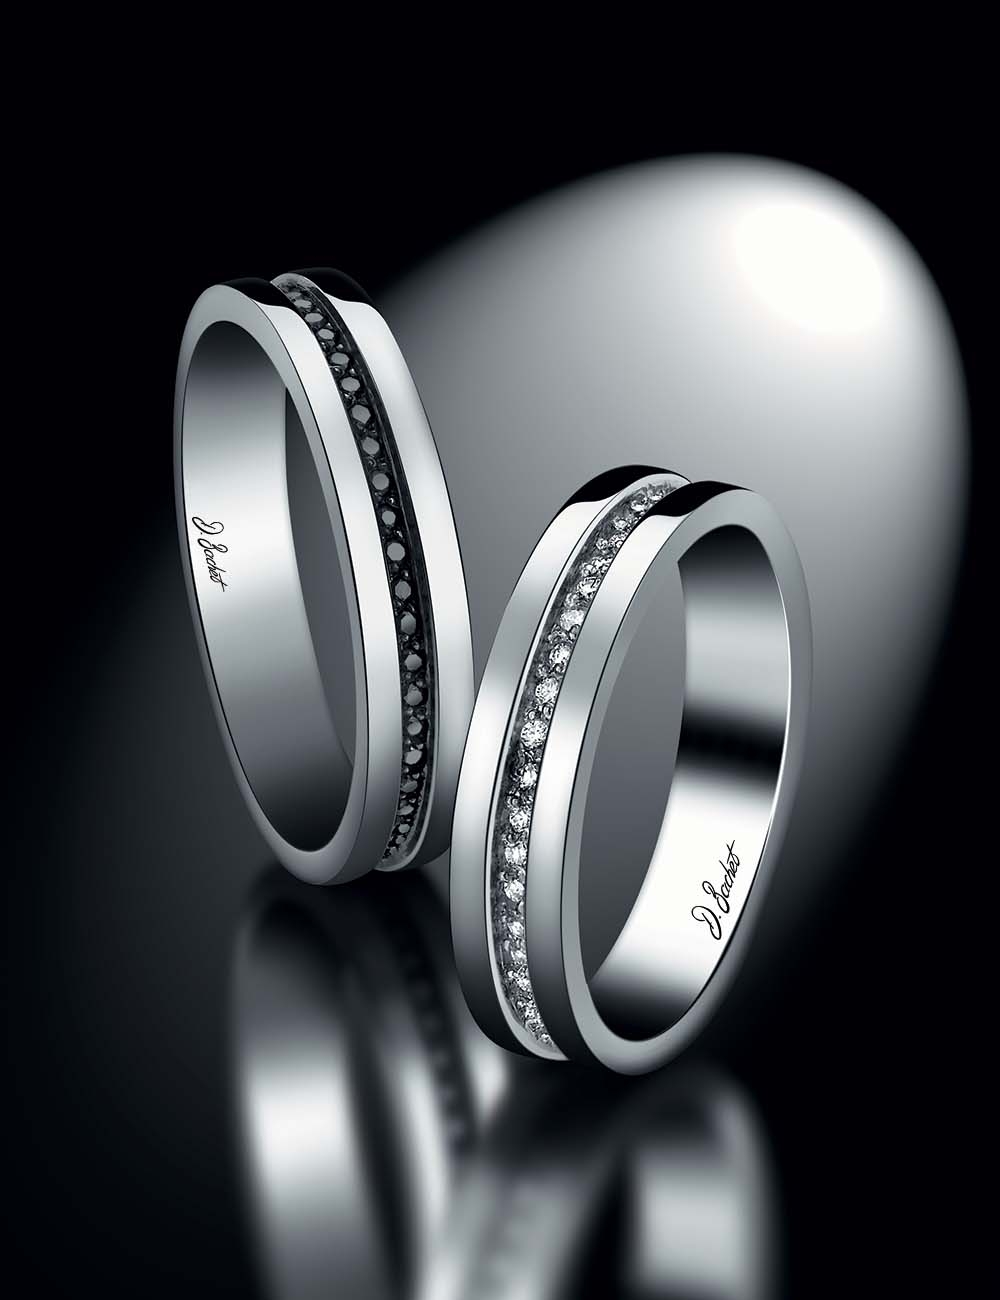 Modern 4.5 mm women's wedding band in platinum, gold, lower-set white diamonds, also in black, for a refined, quiet luxury.